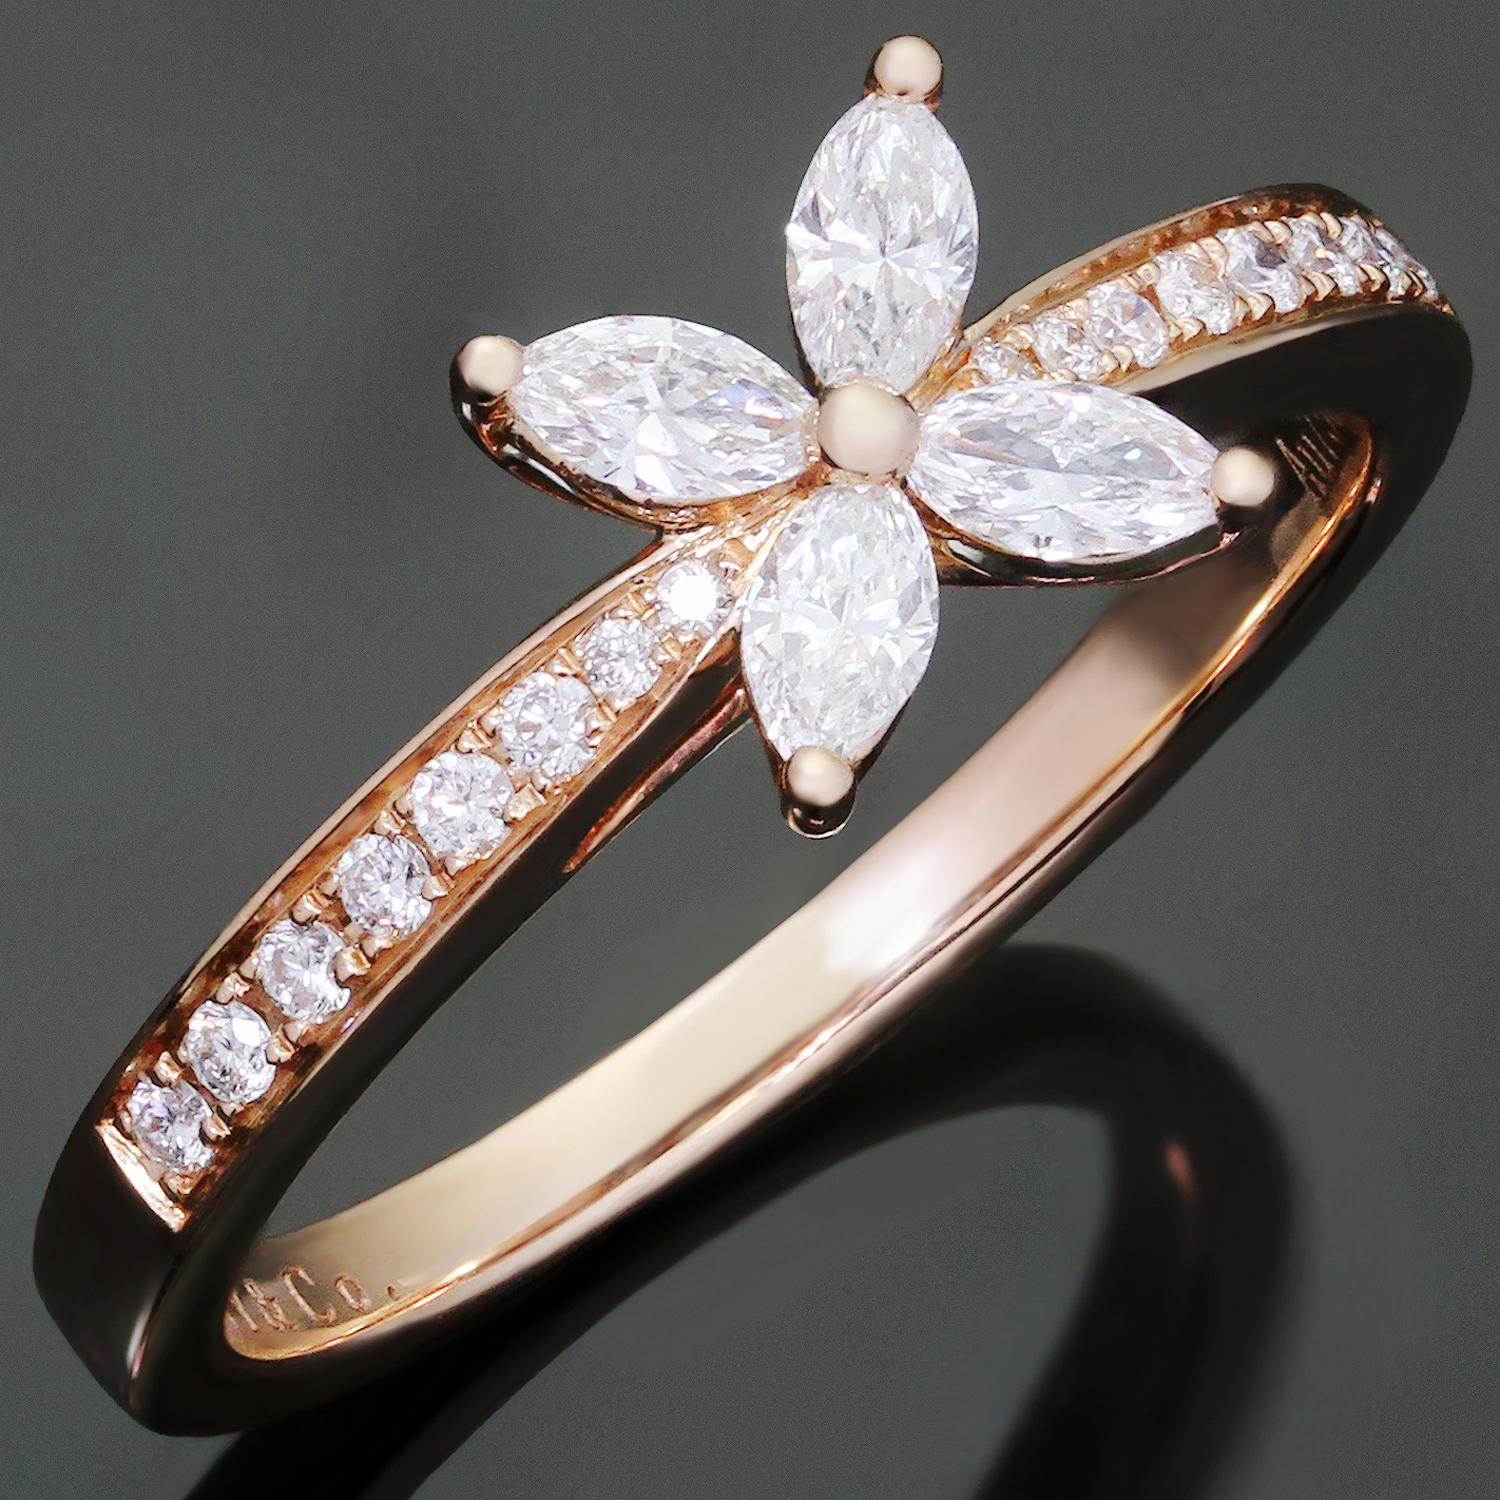 This iconic ring from Tiffany's exquisite Victoria collection is crafted in 18k rose gold and set with marquise-cut diamonds of an estimated 0.32 carats and brilliant-cut round diamonds of an estimated 0.12 carats. Made in United States circa 2010s.